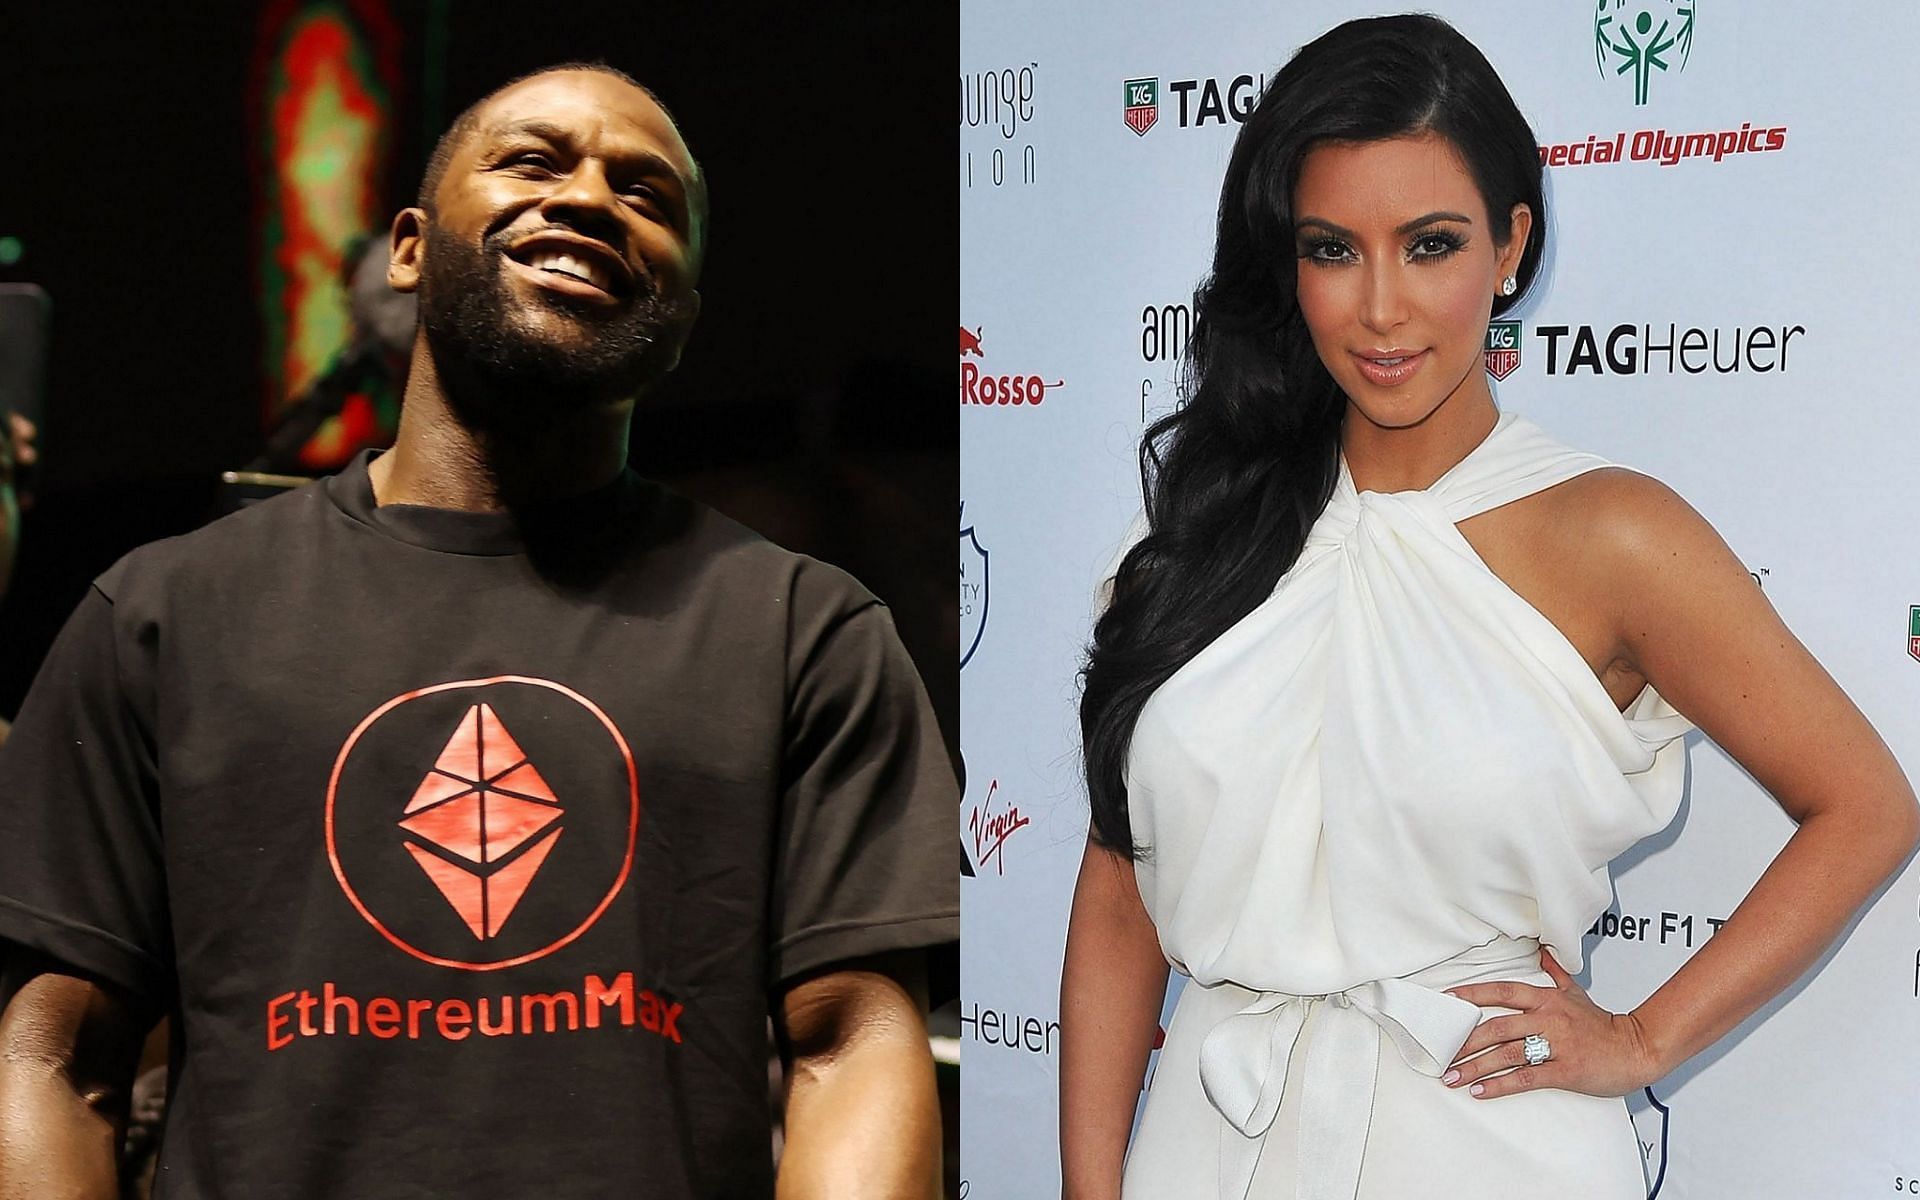 Floyd Mayweather and Kim Kardashian are being sued for promoting EthereumMax